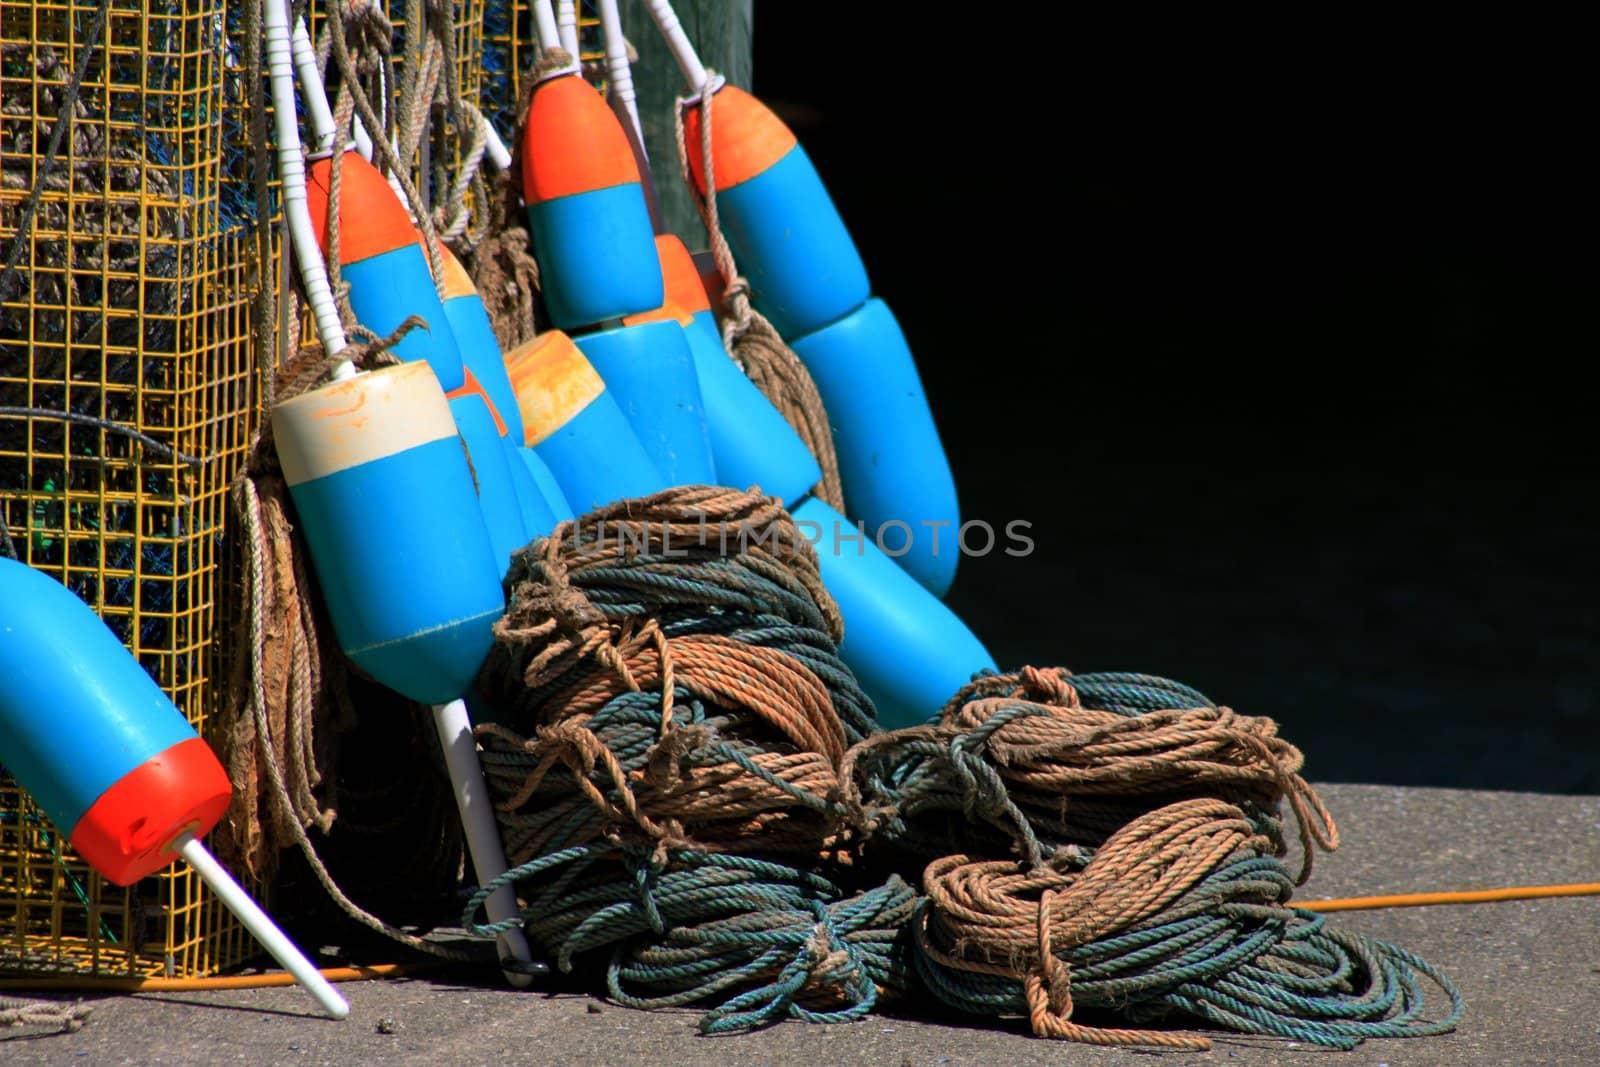 Buoys and rope by dbriyul